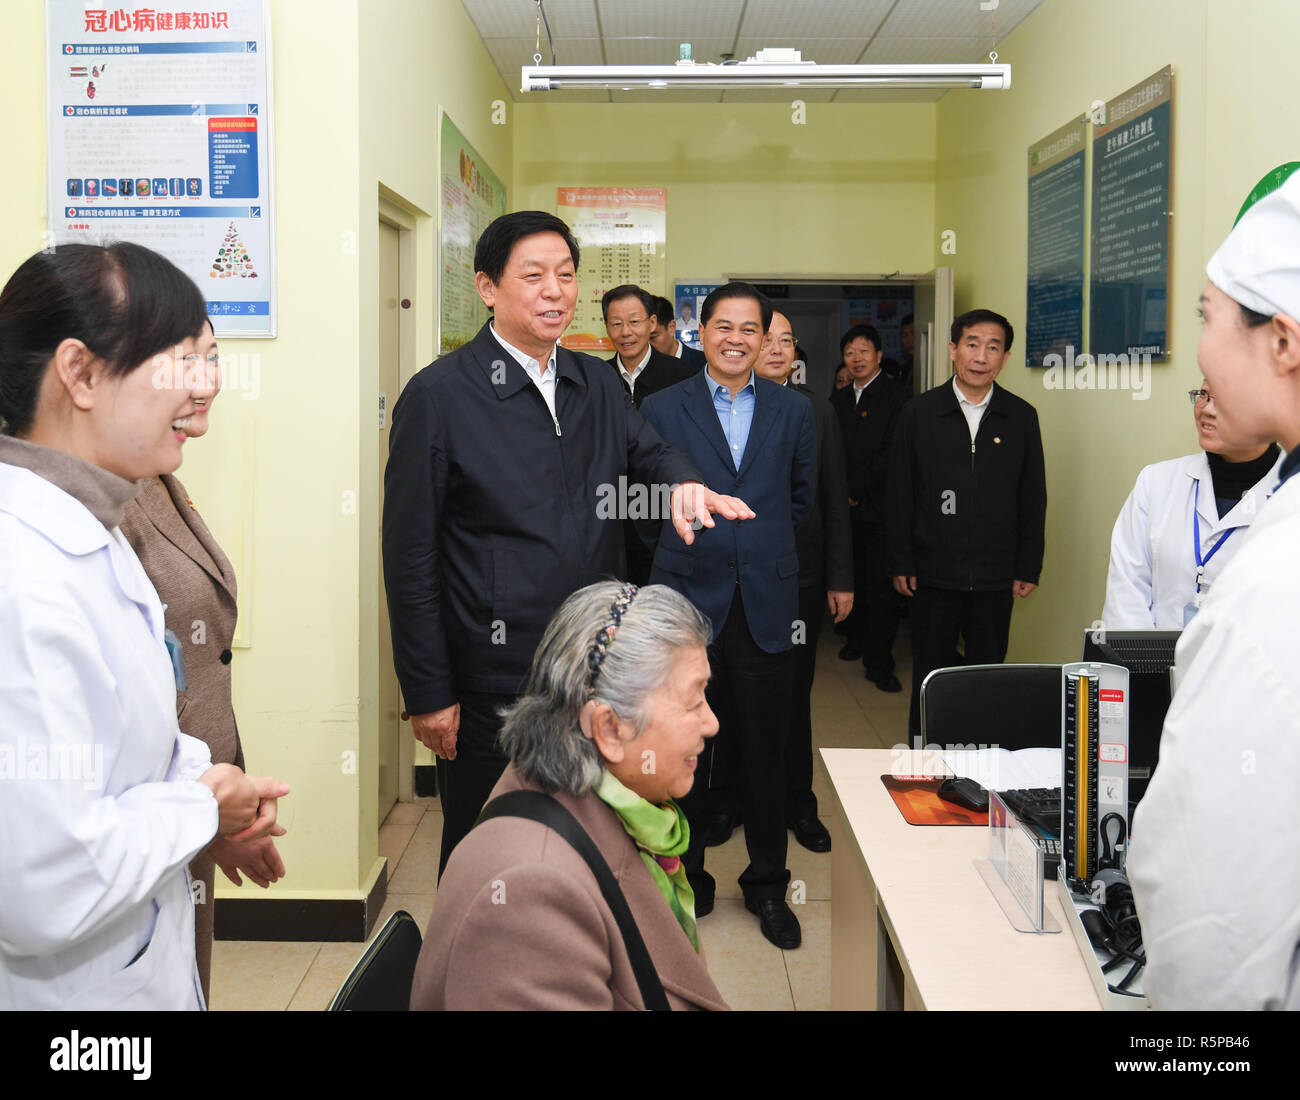 Kunming, China's Yunnan Province. 29th Nov, 2018. Li Zhanshu, a member of the Standing Committee of the Political Bureau of the Communist Party of China Central Committee and chairman of the National People's Congress Standing Committee, talks with doctors and patients in a healthcare center in Qianwei community of Xishan District of Kunming City, southwest China's Yunnan Province, Nov. 29, 2018. Li made a research on how to better make a law on basic medical care and health promotion during his four-day tour to Yunnan Province. Credit: Shen Hong/Xinhua/Alamy Live News Stock Photo